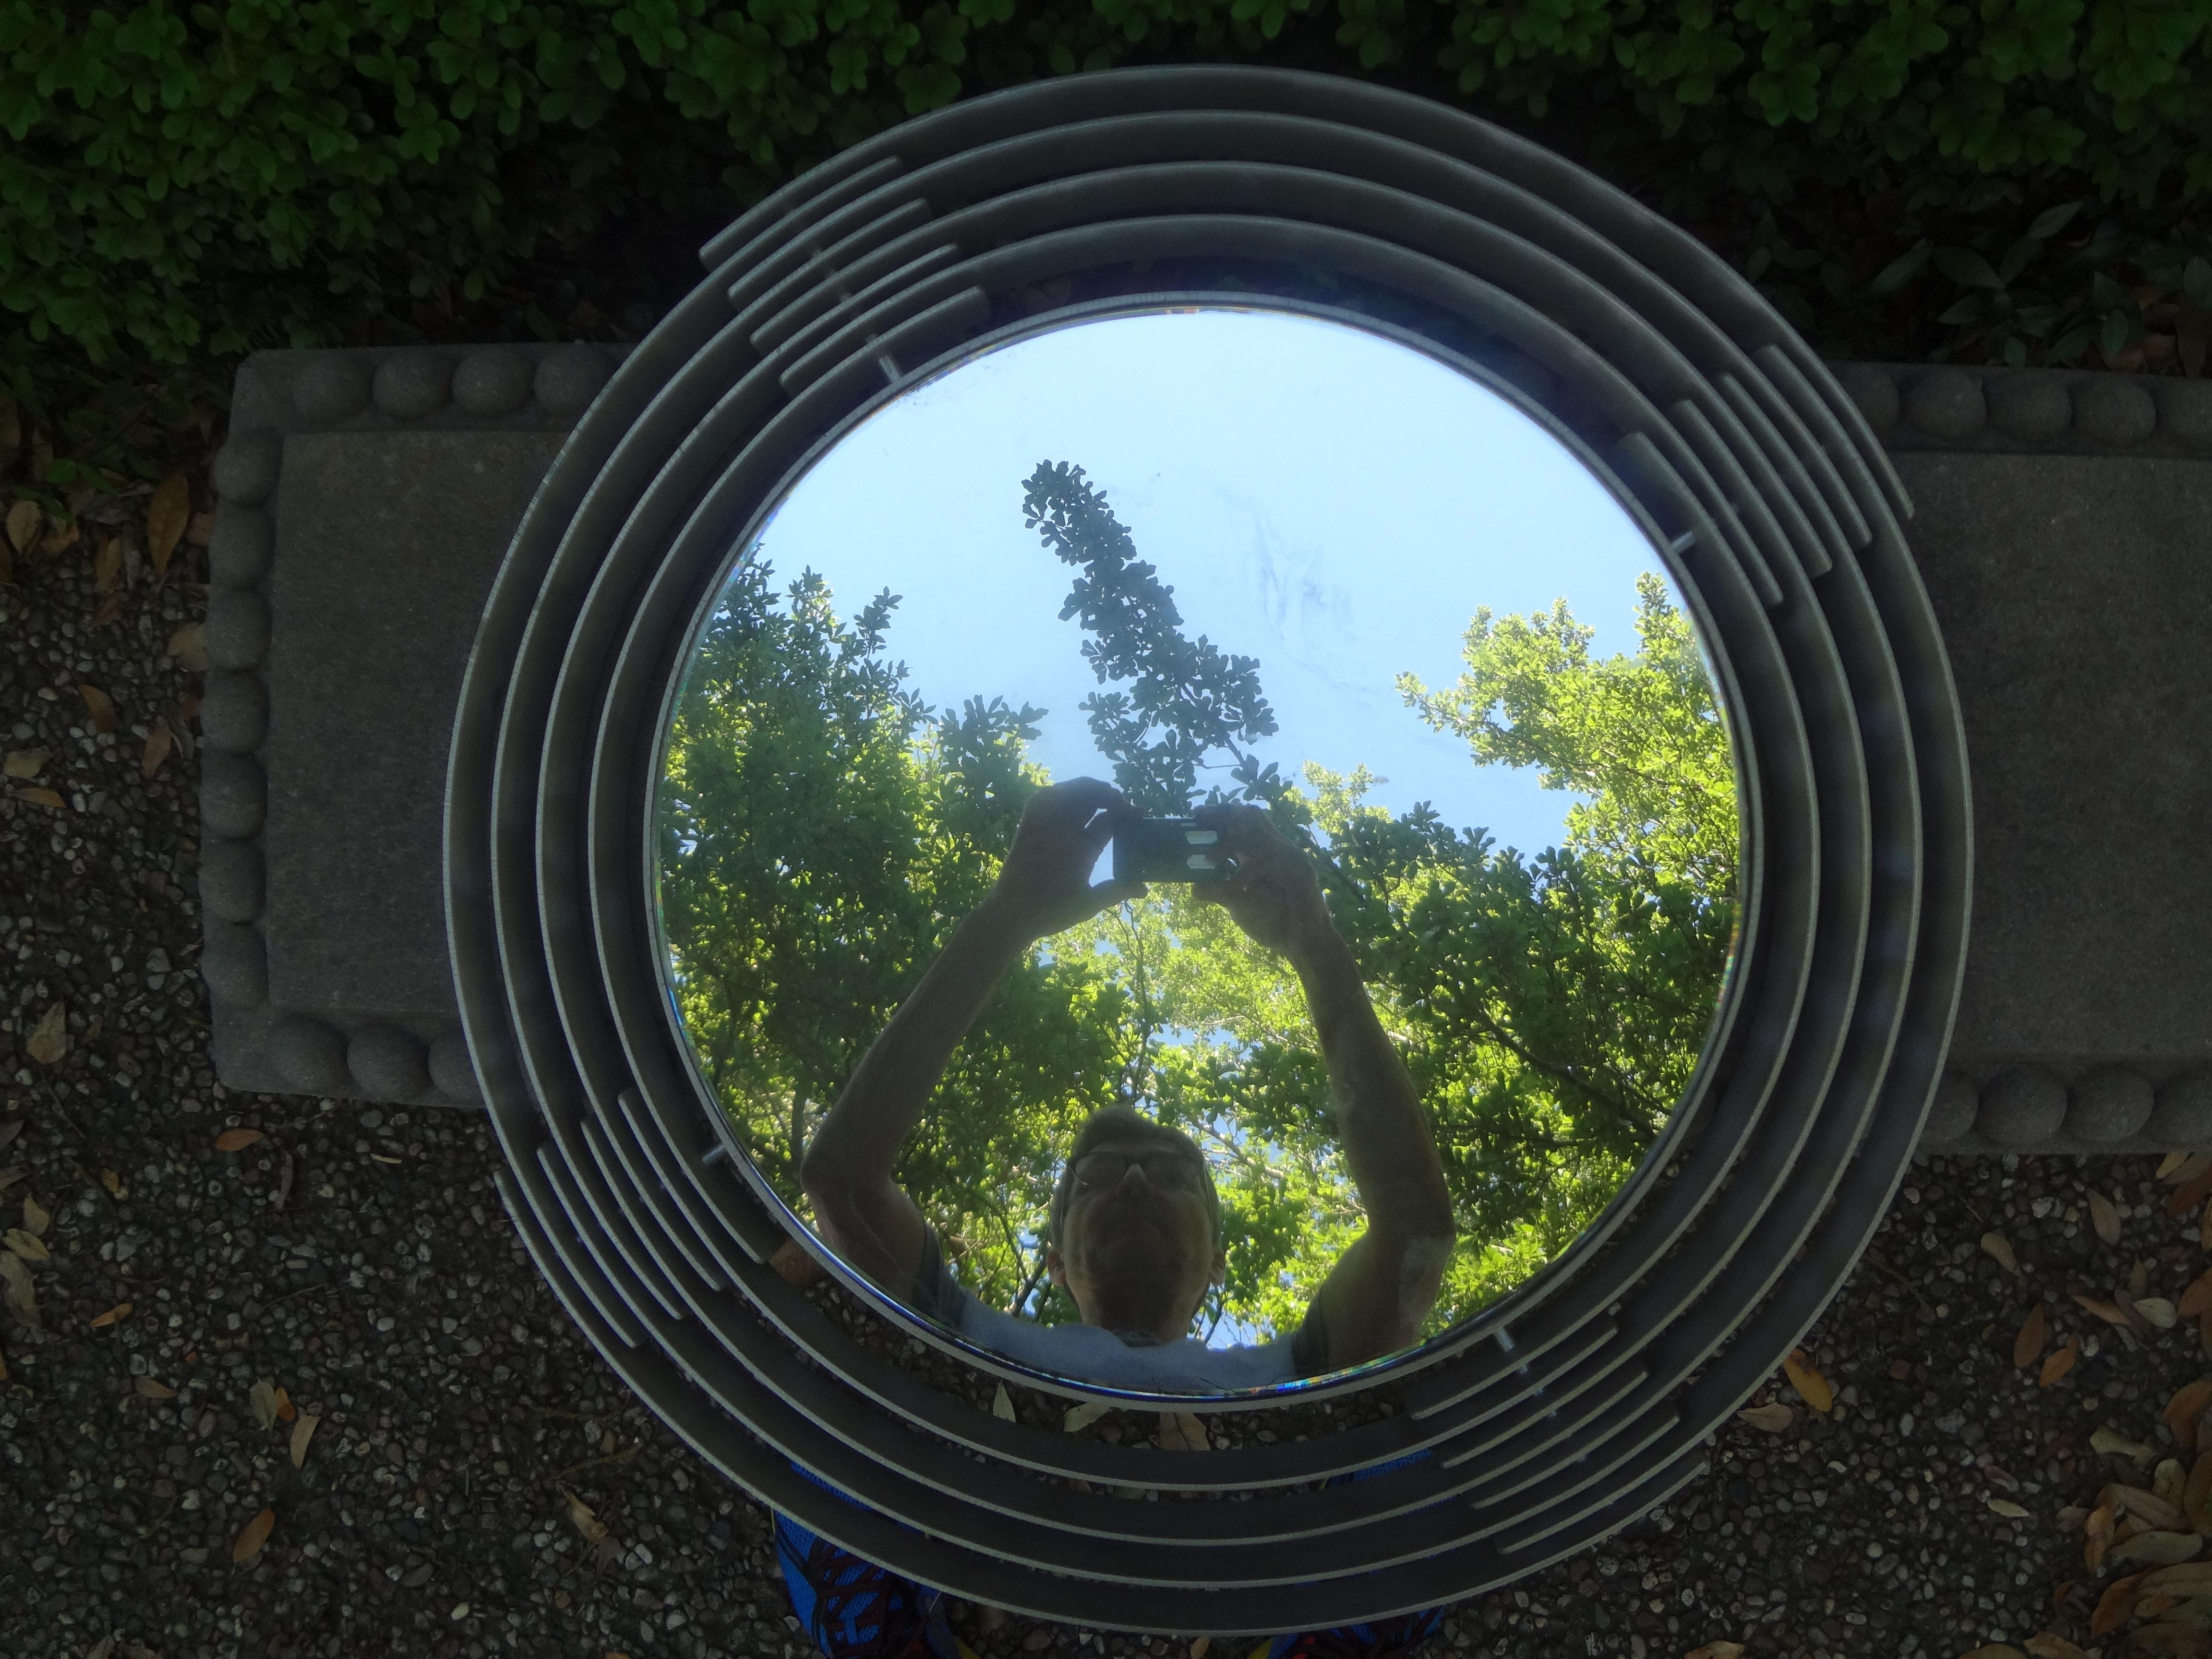 Italian Modern aluminum mirror by Paolo Rizzato.
Stunning Italian Mid-Century Modern circular aluminum mirror from Milan, stamped Rizzato. This great Italian Postmodern round mirror.
is a very simple, yet interesting design. Paolo Rizzato is an